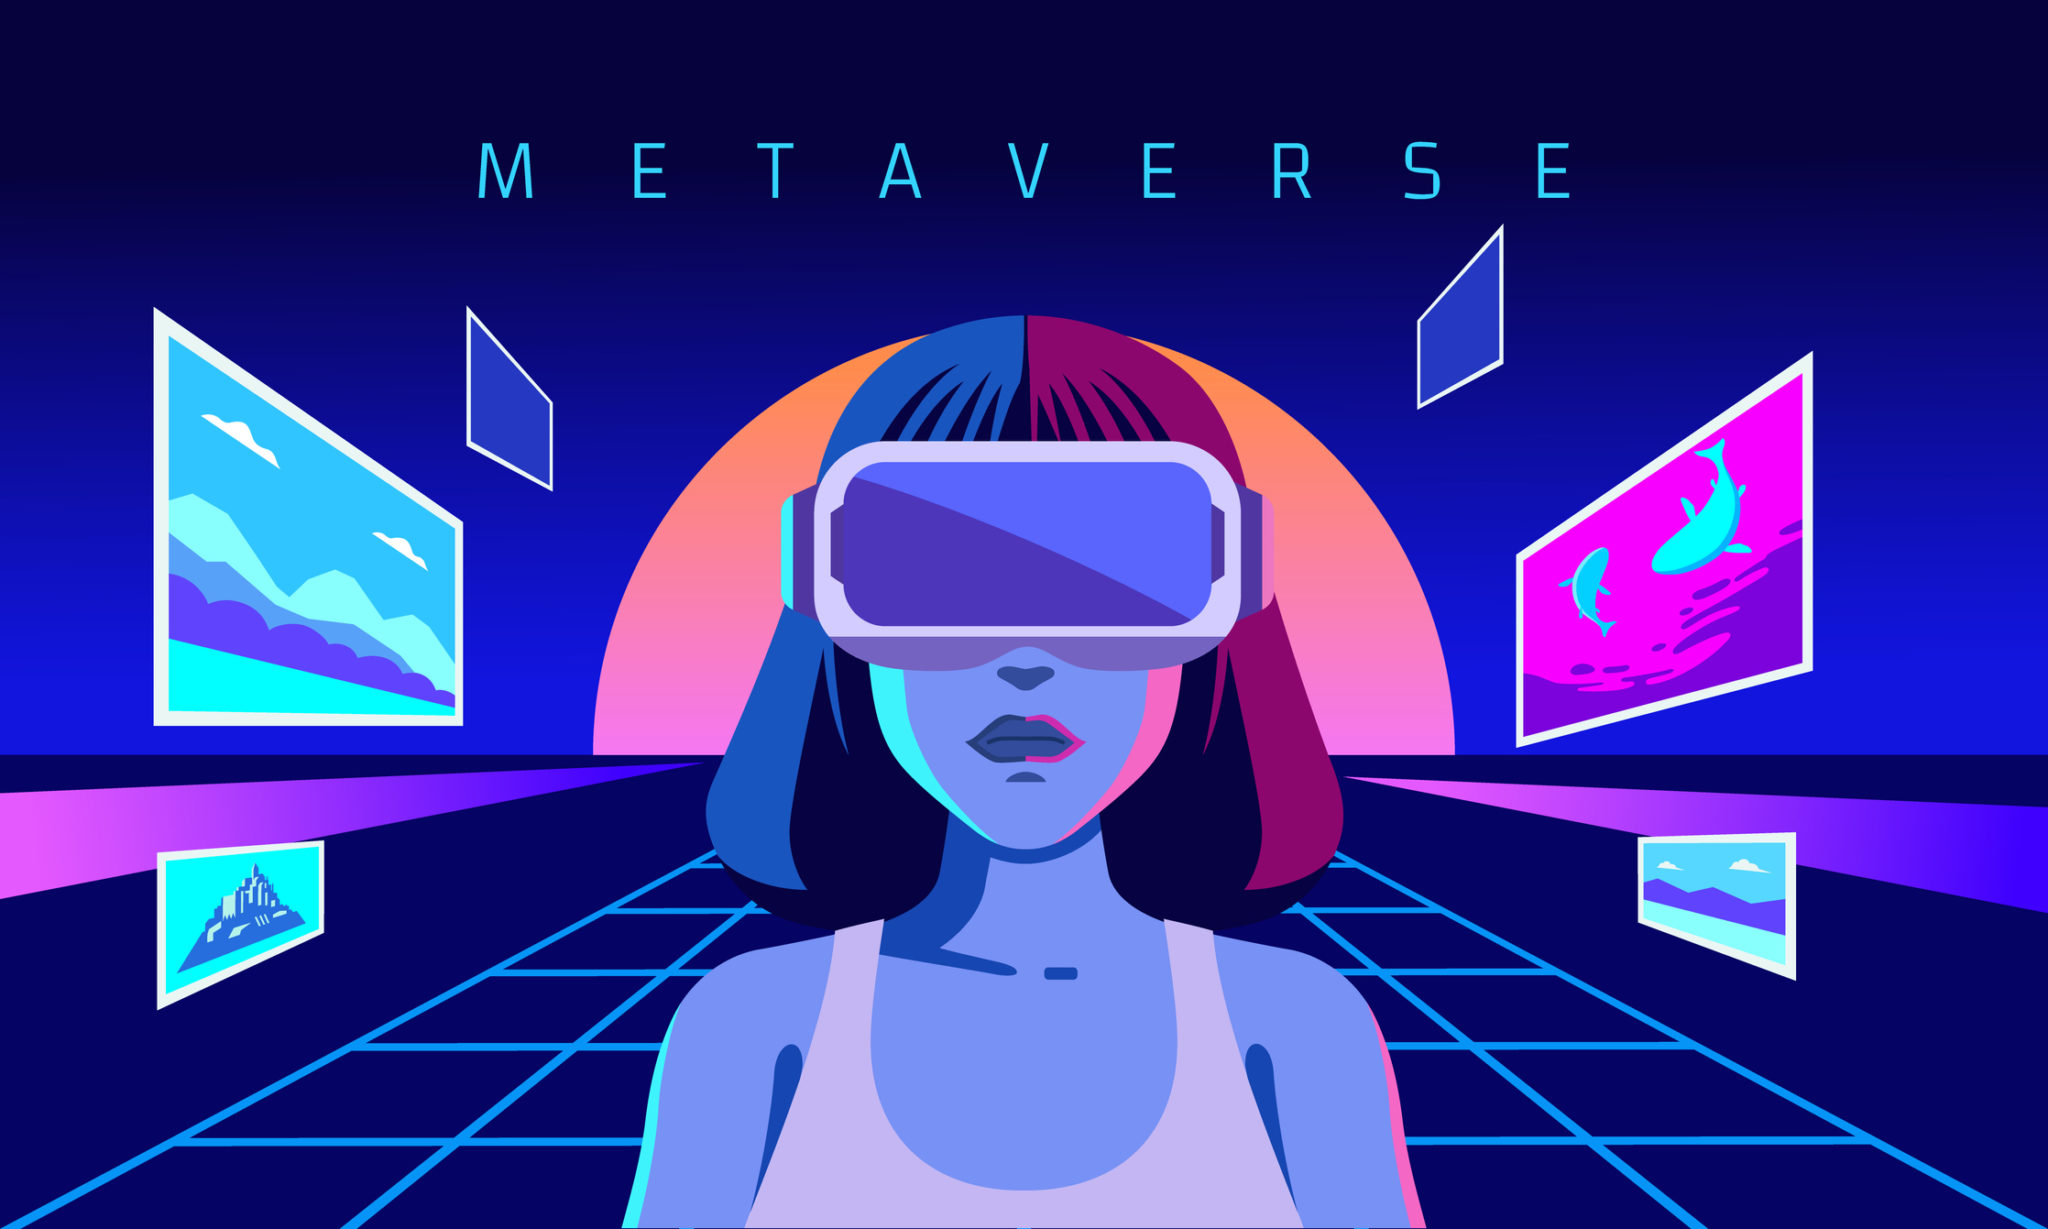 Metaverse Digital Virtual Reality Technology of a woman with glasses and a headset VR connected to the virtual space